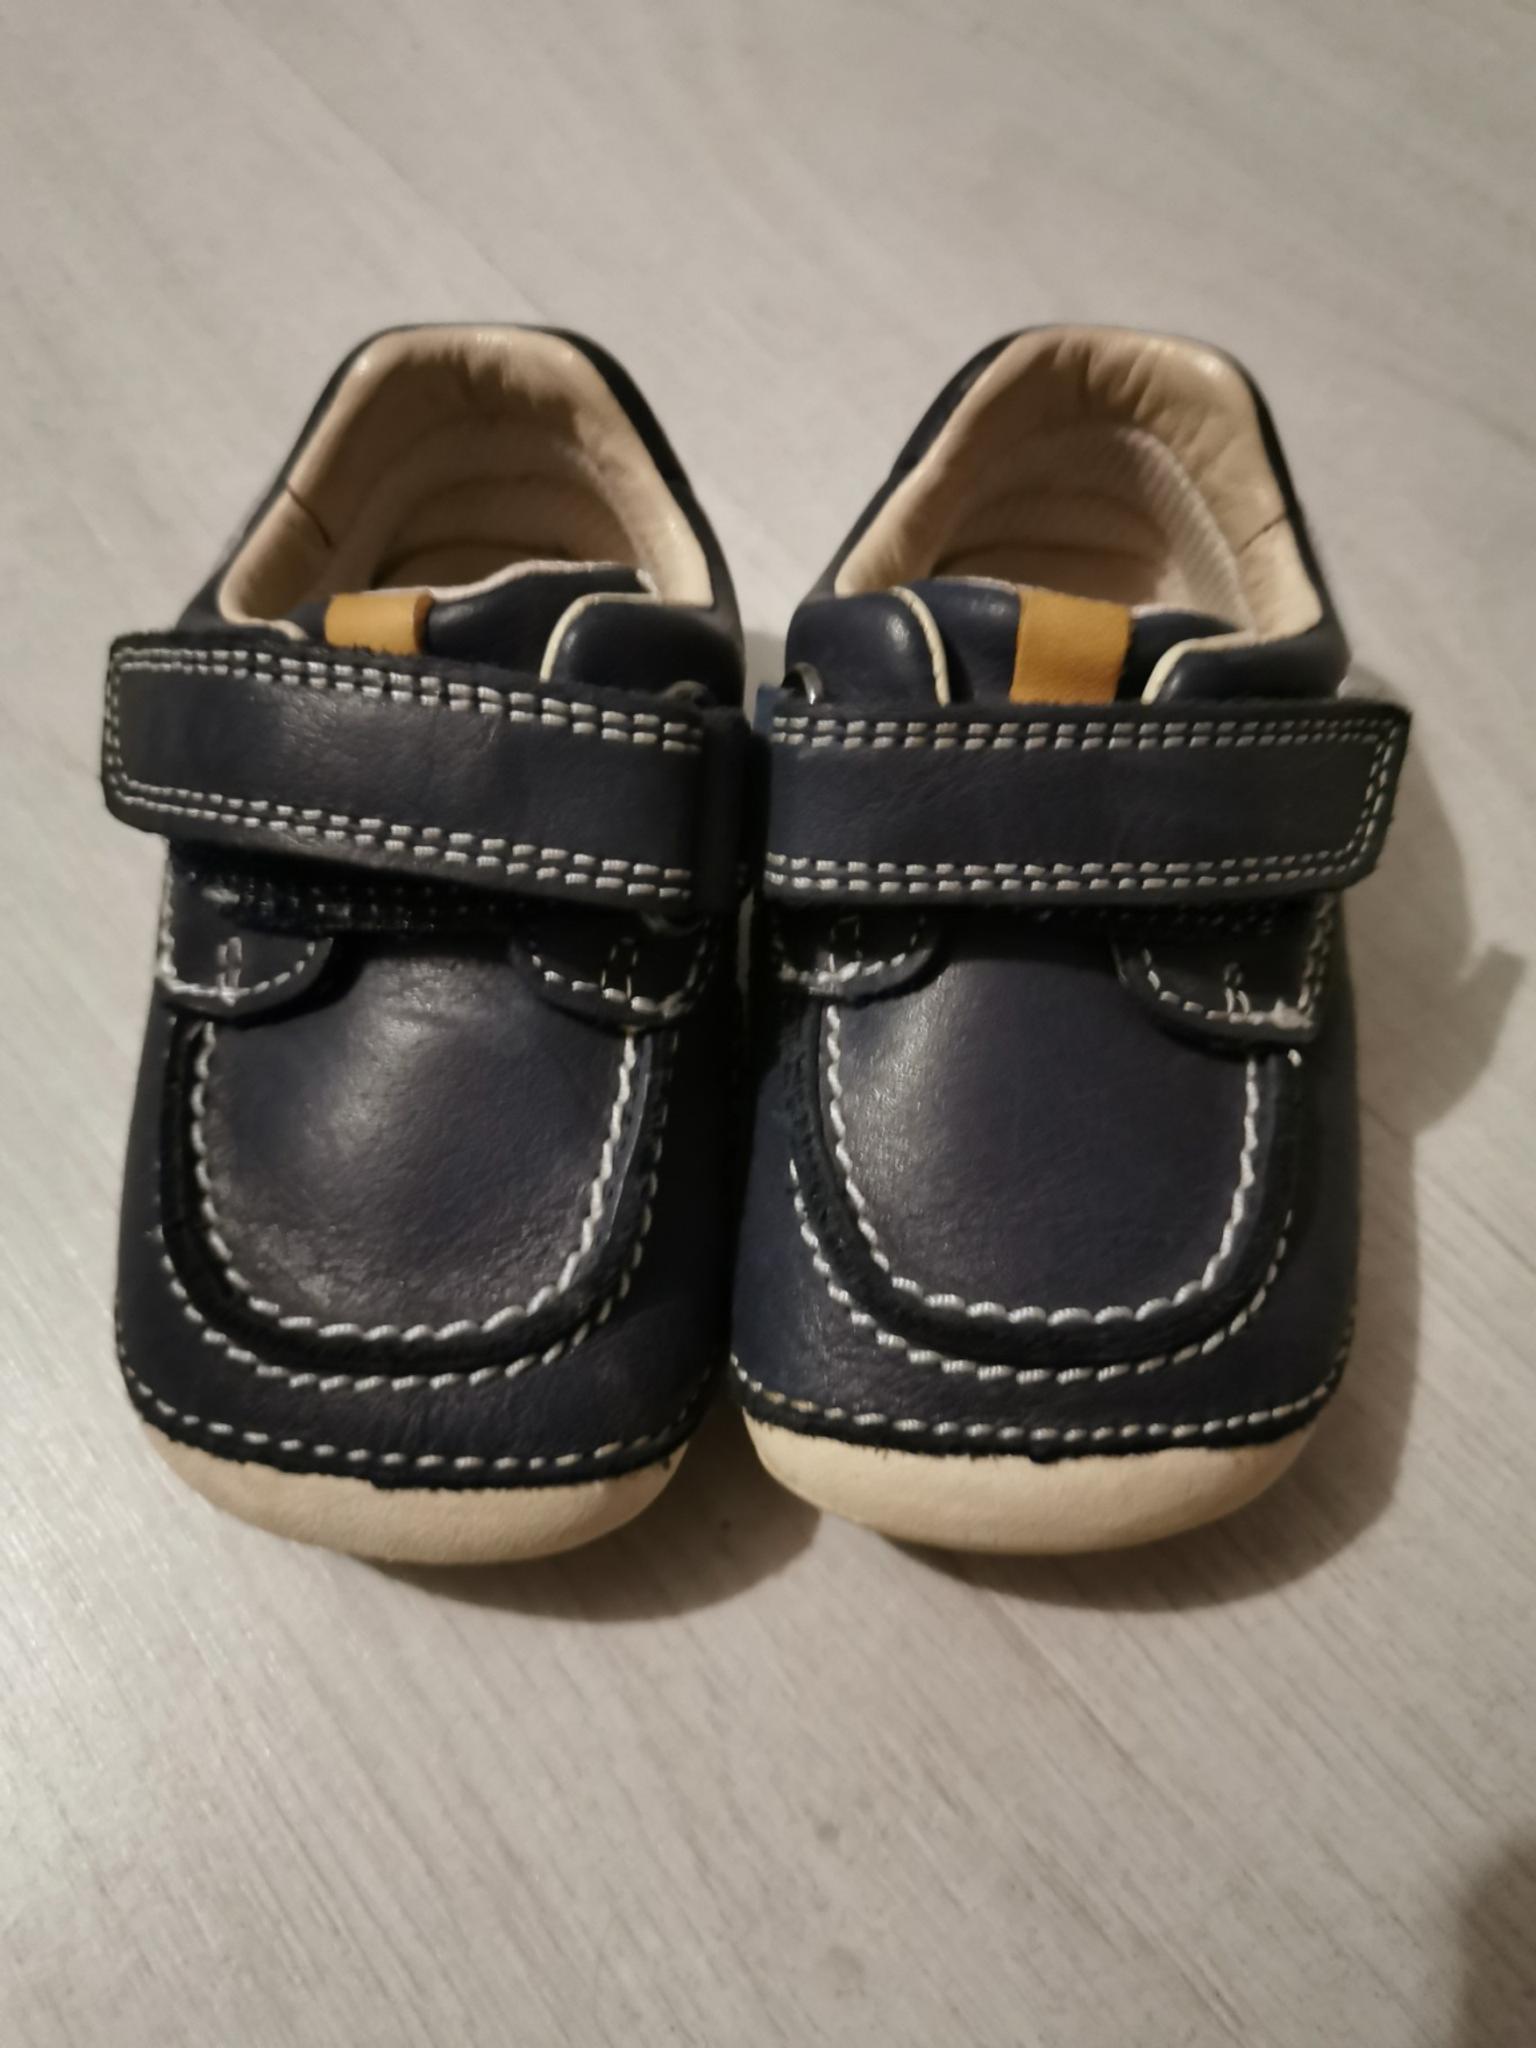 clarks first shoe